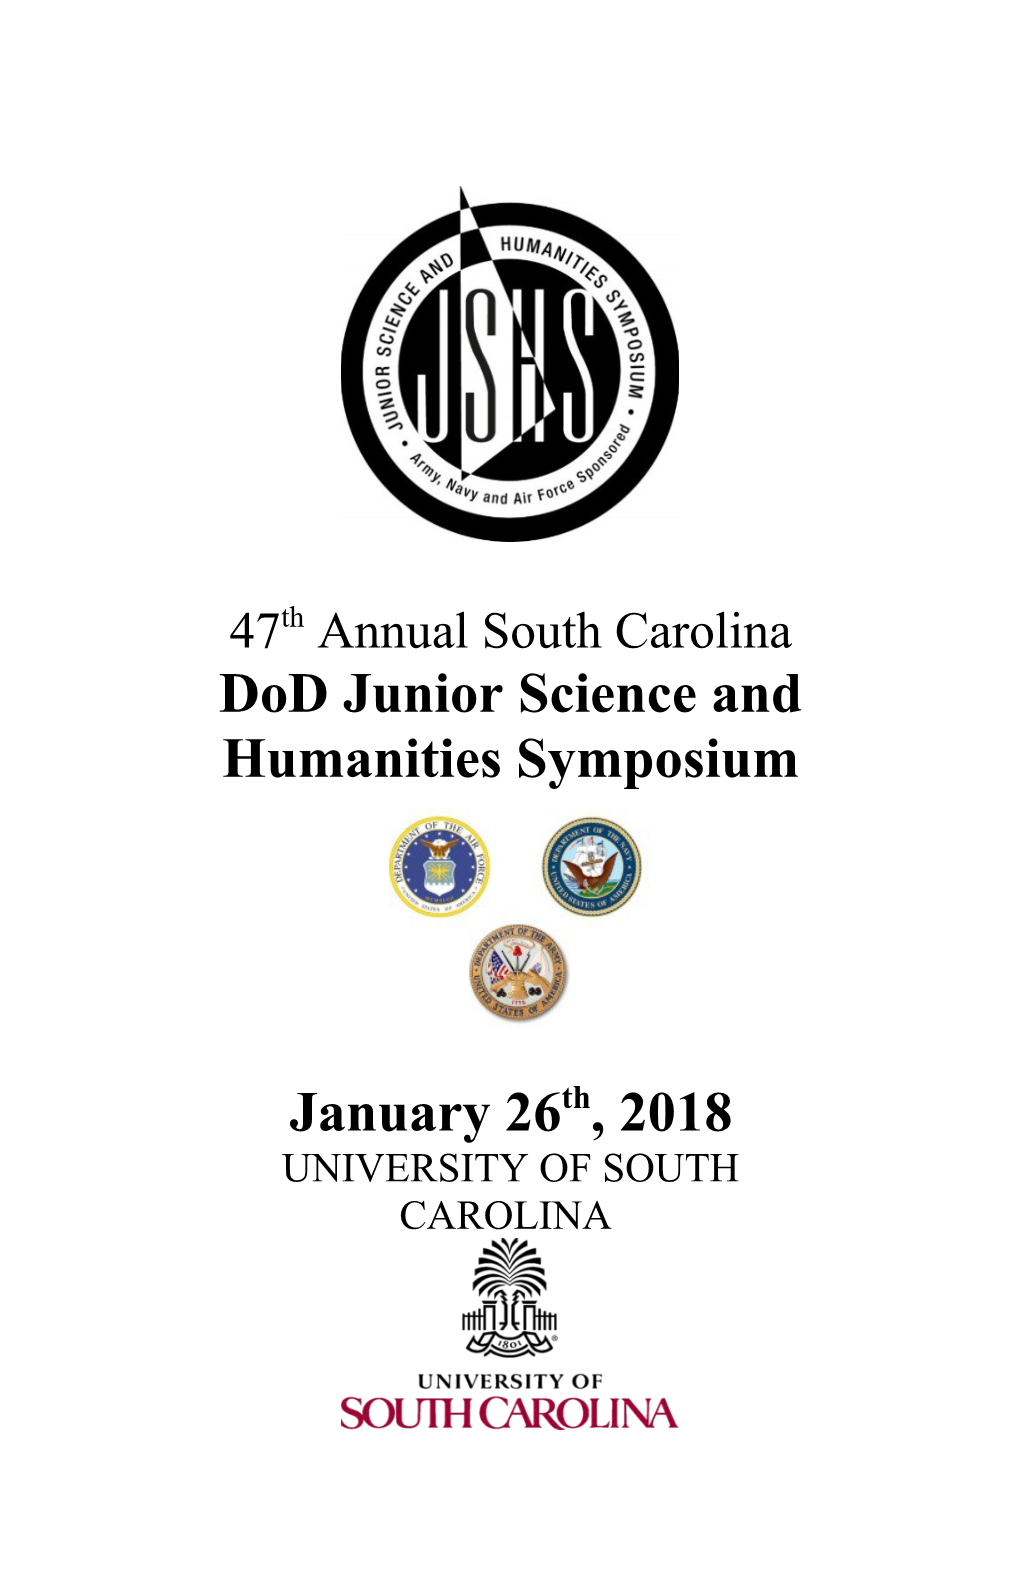 Dod Junior Science and Humanities Symposium